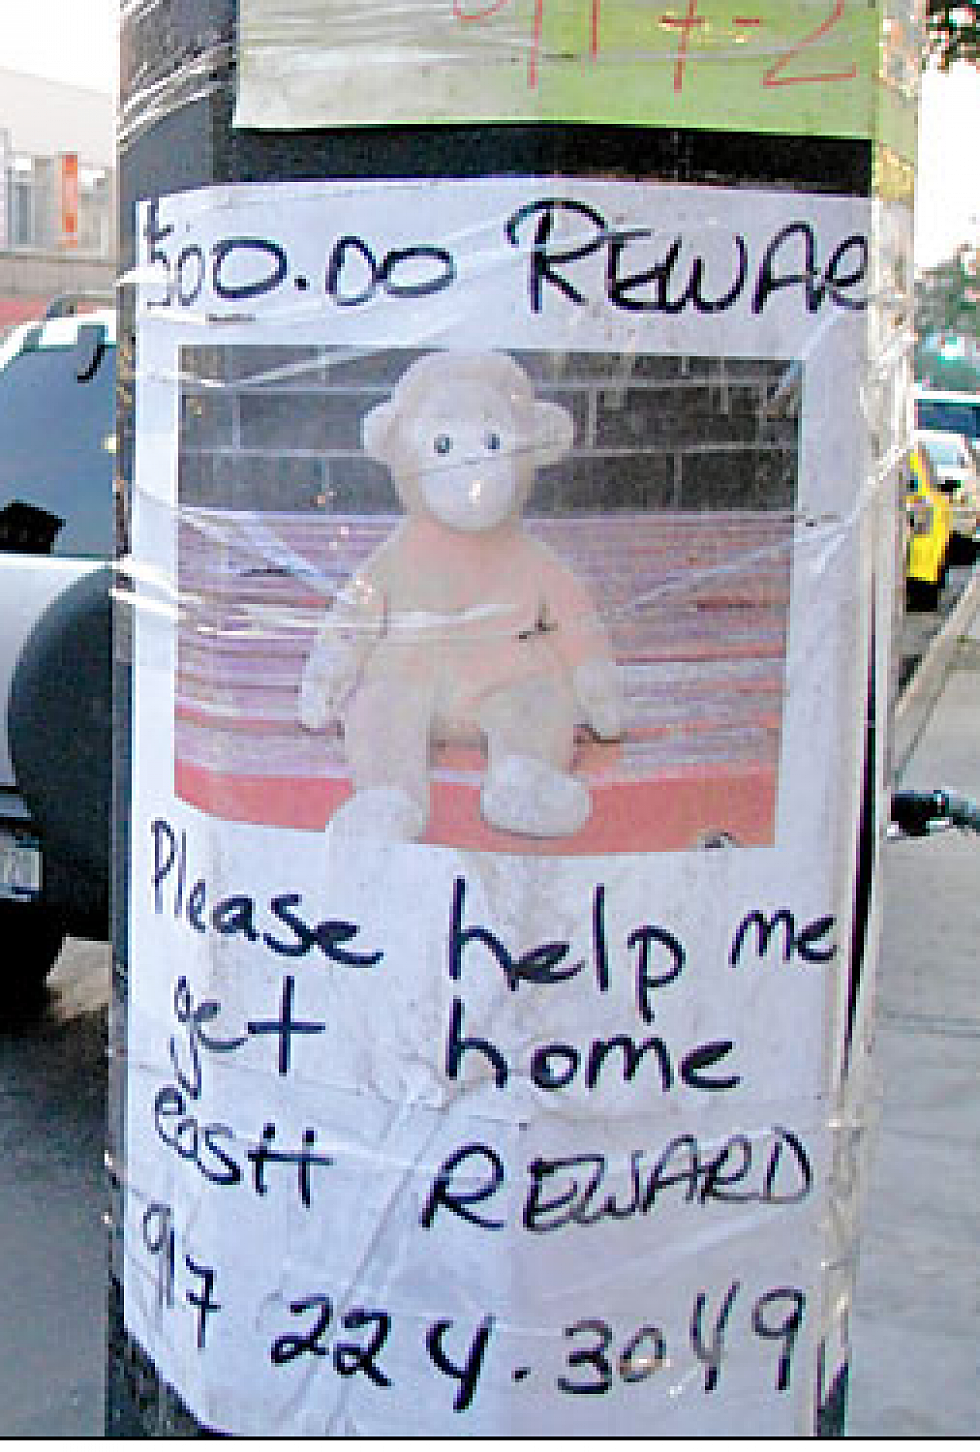 $500 Reward Offered For Missing Beanie Baby